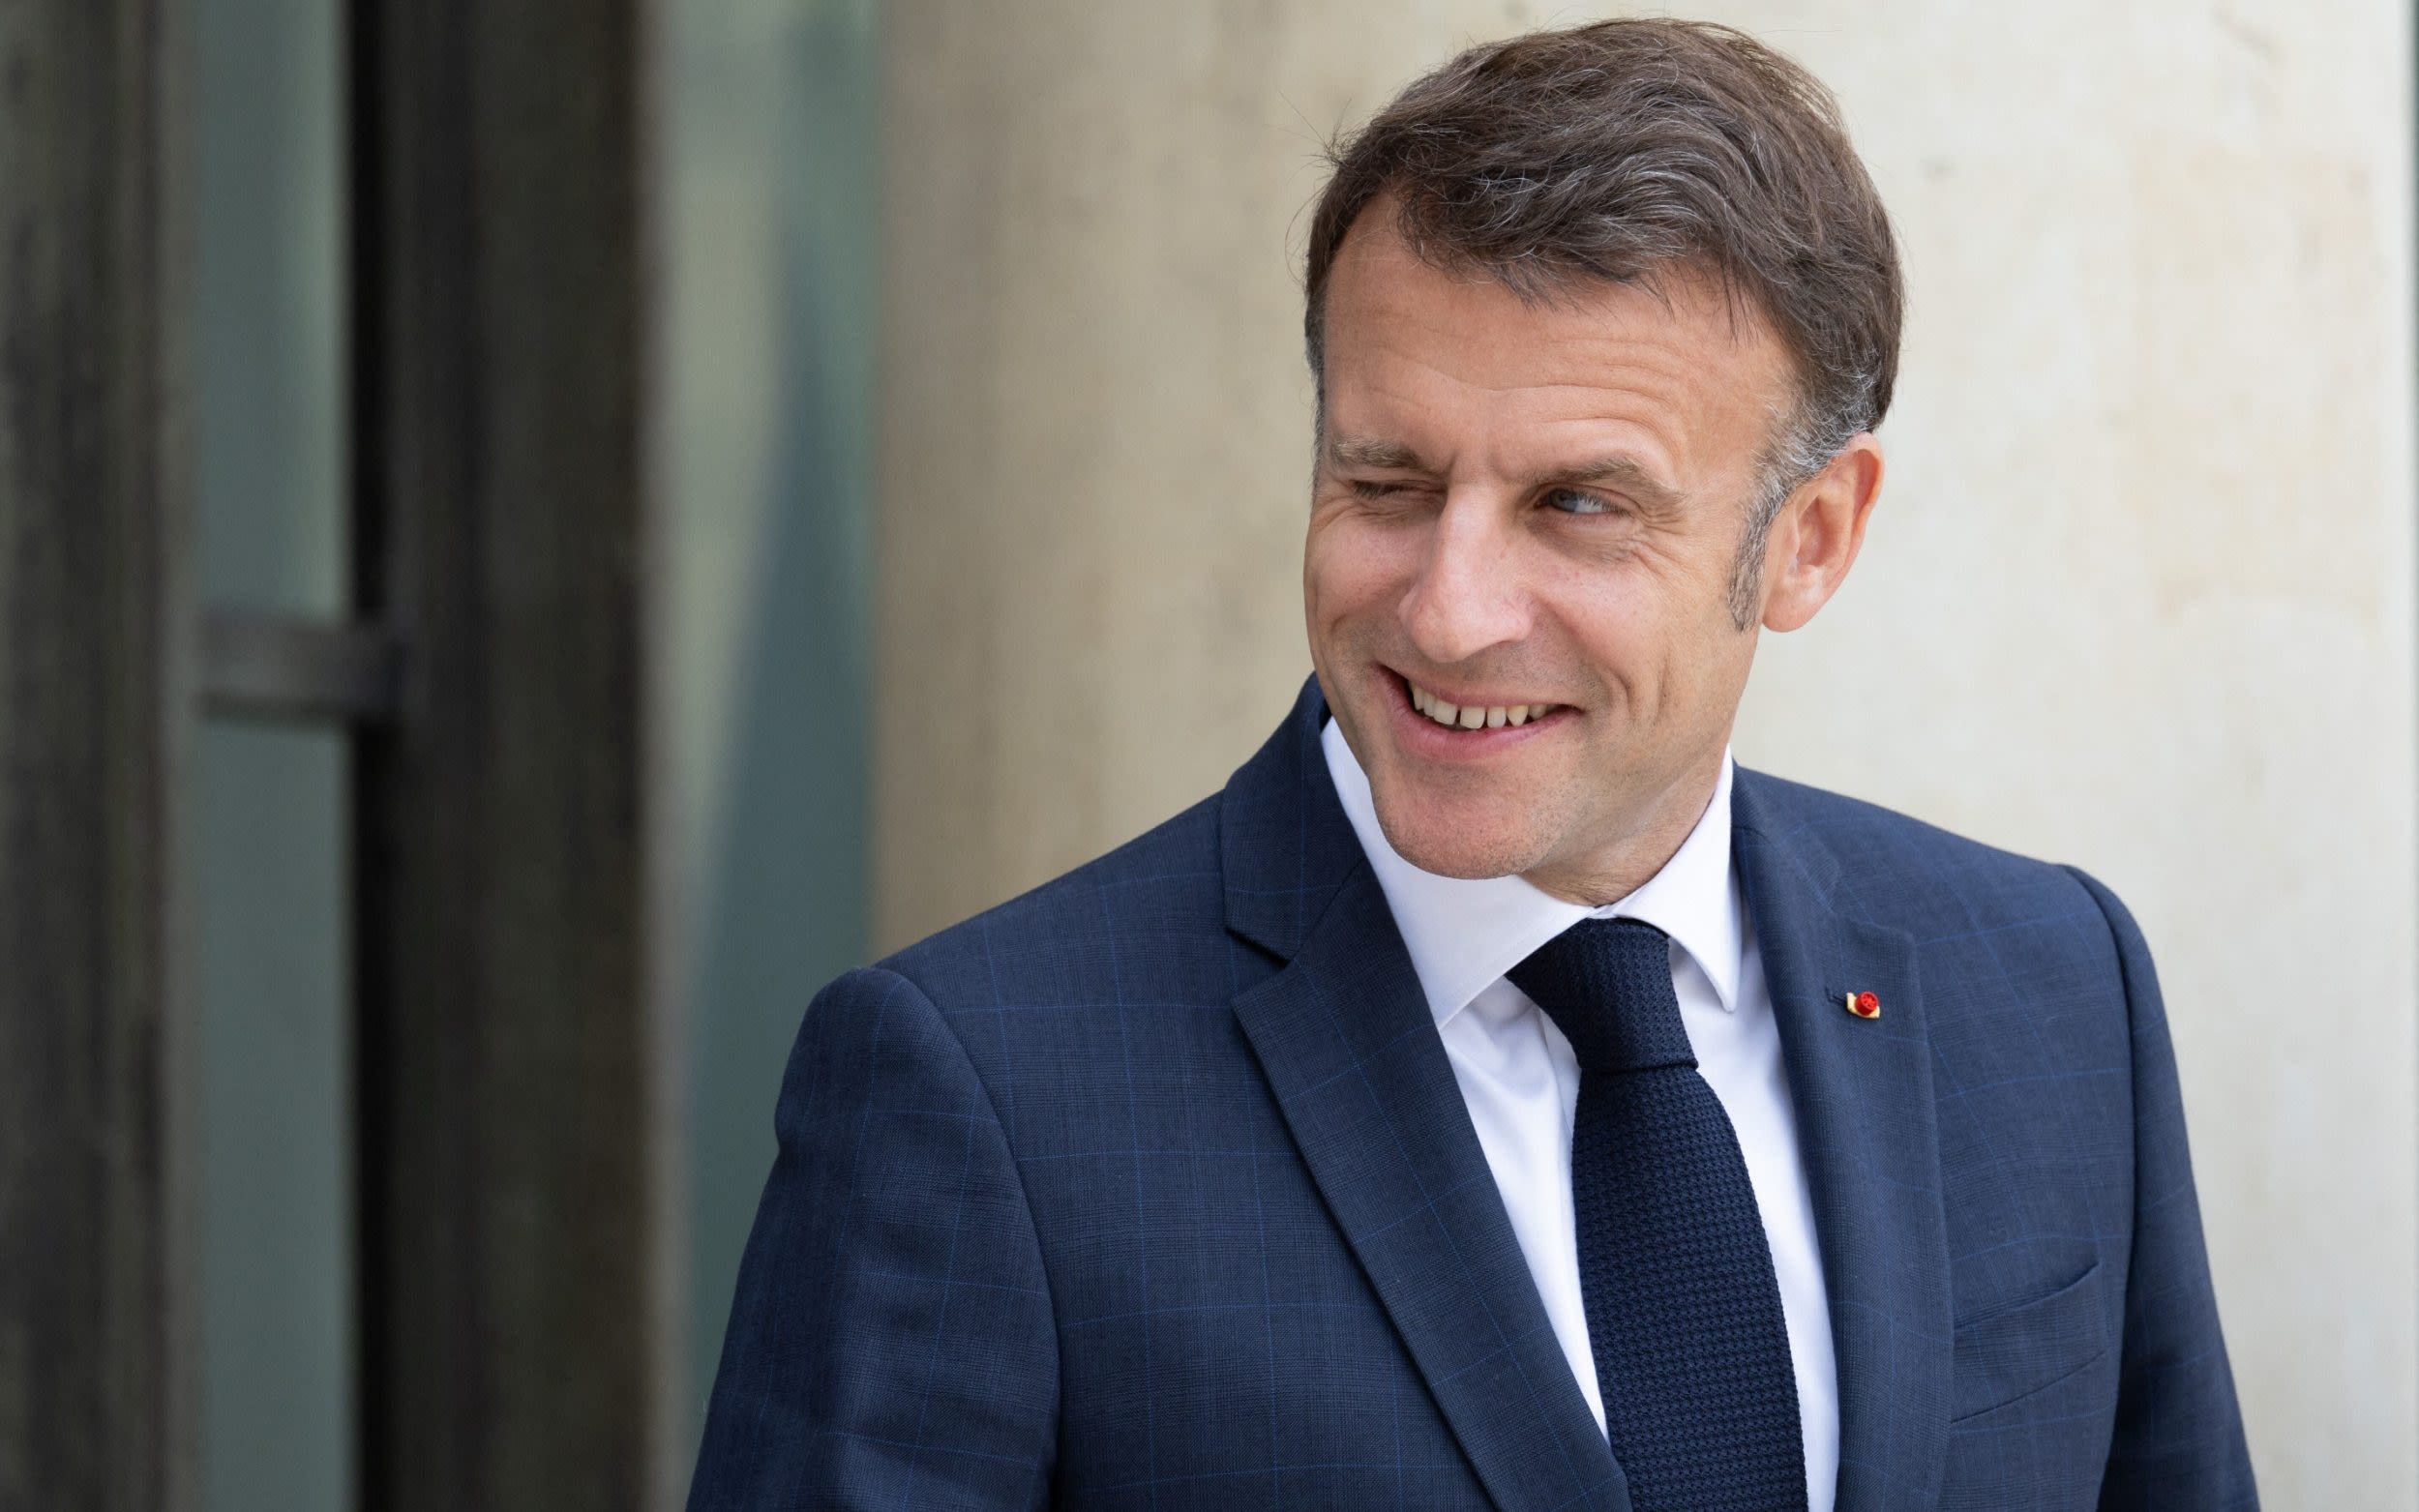 Macron pins hopes on ‘poster boy’ prime minister as he trails Le Pen